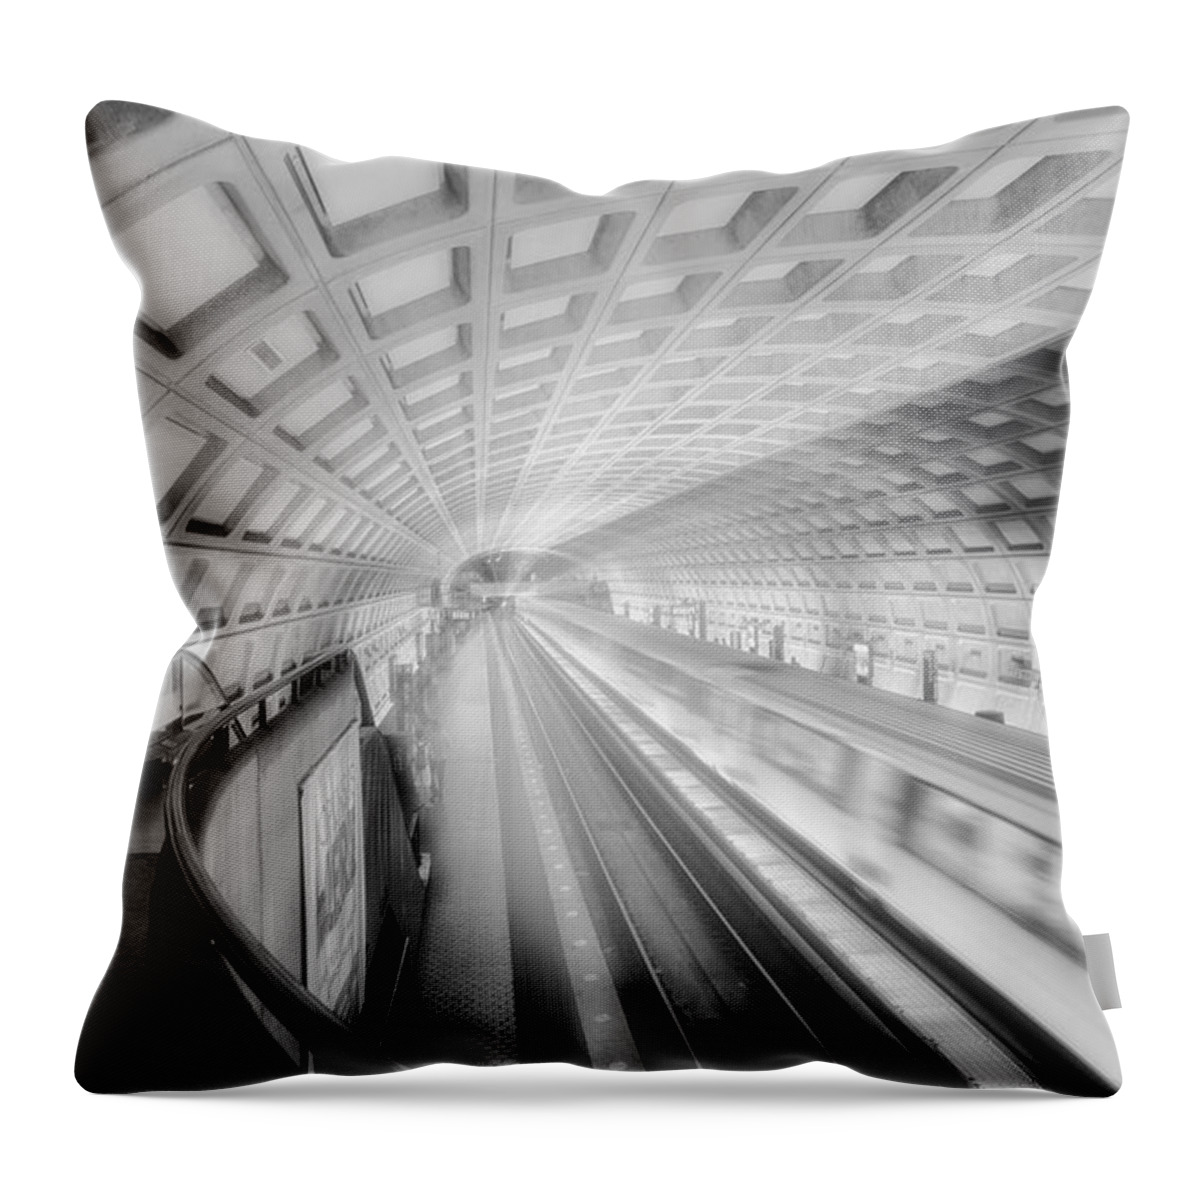 District Of Columbia Throw Pillow featuring the photograph Dupont Circle Station BW by Susan Candelario